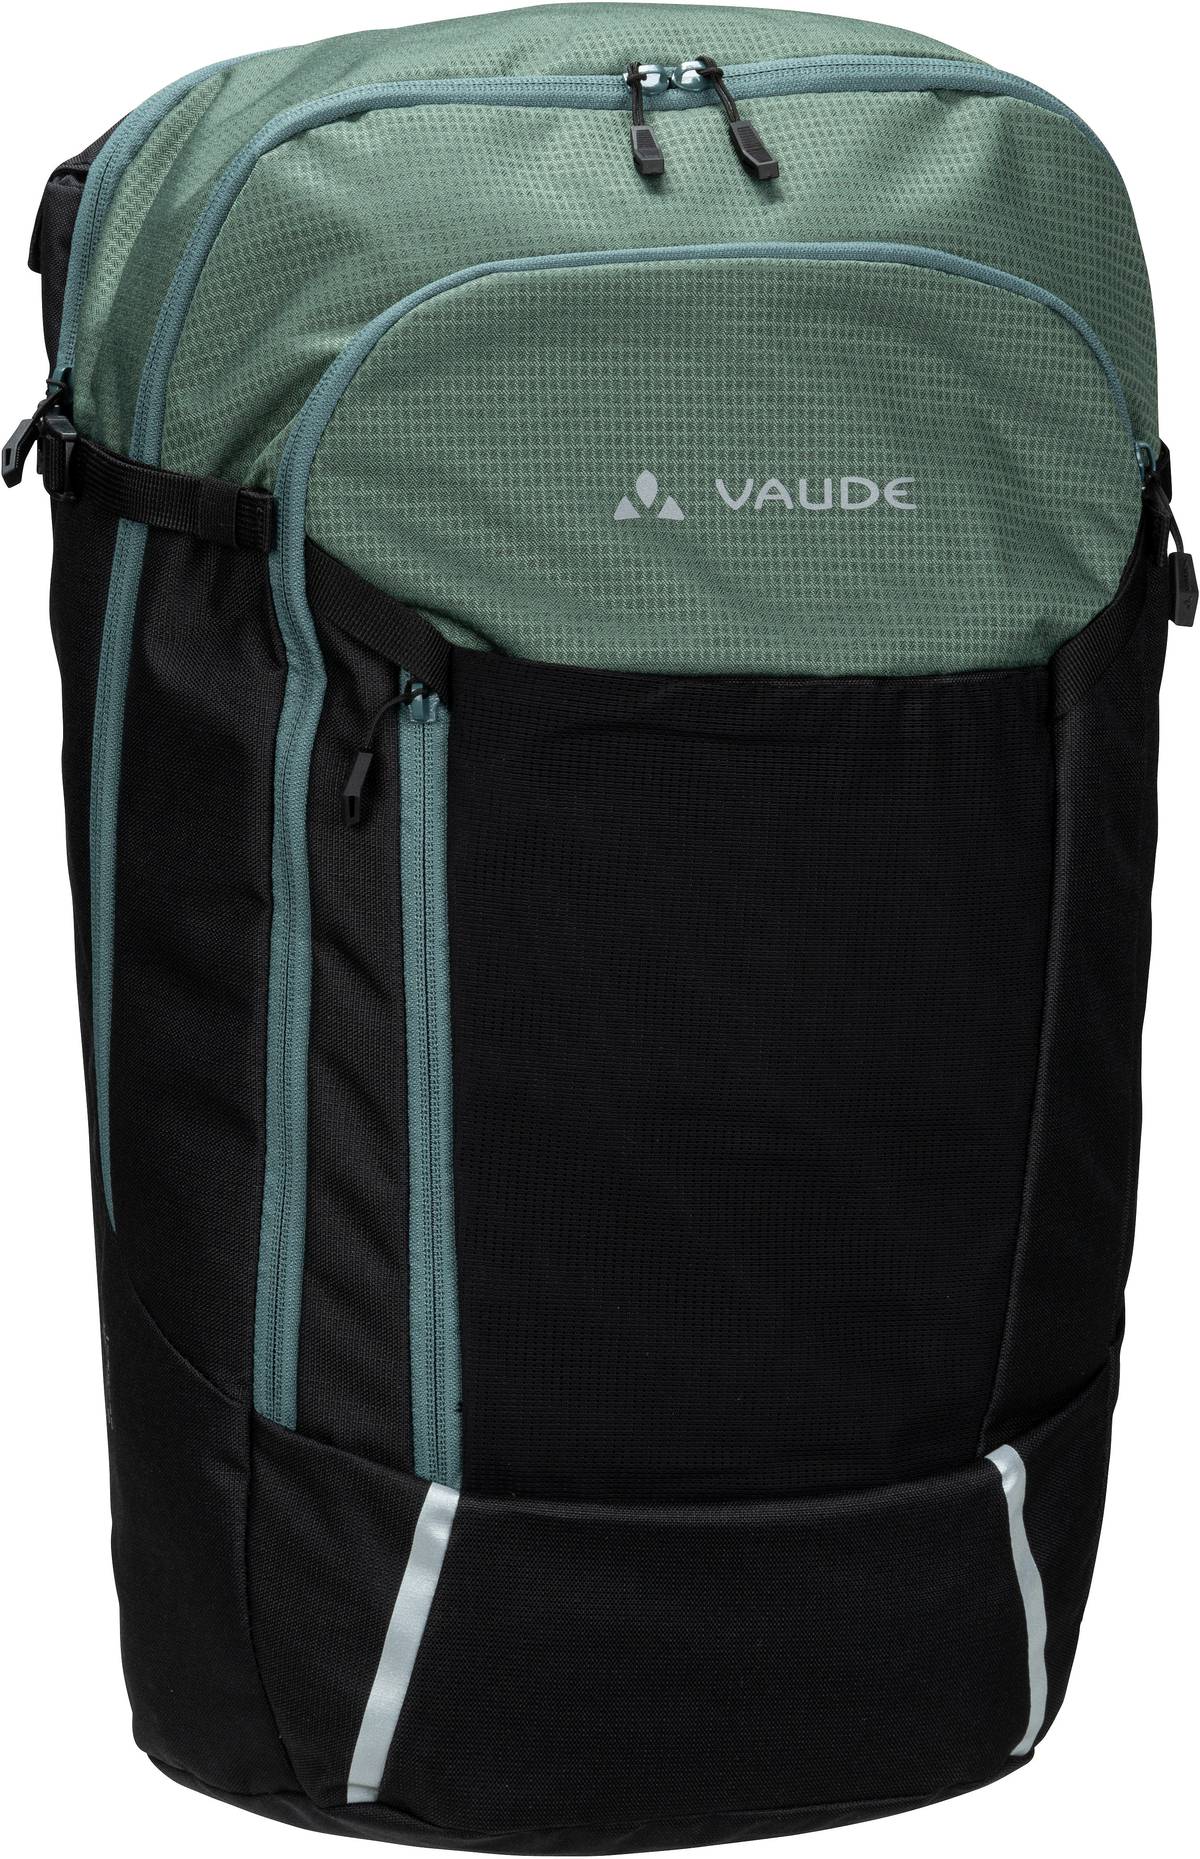 Vaude Cycle 28 II - Black/Dusty Forest